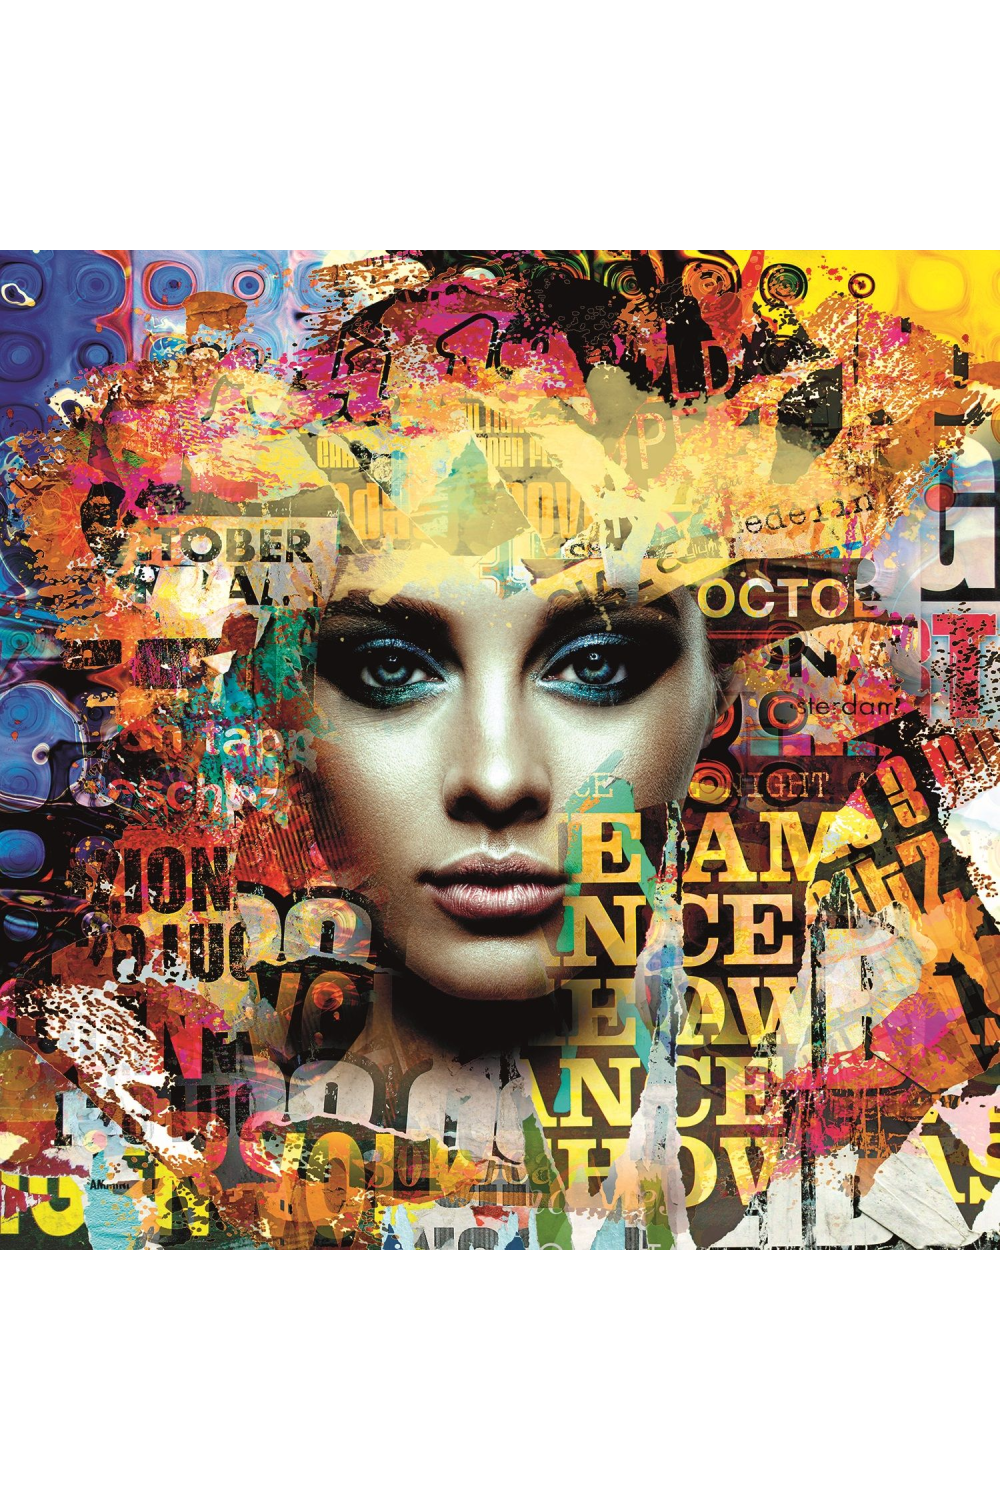 Decoupage Style Photographic Artwork | Andrew Martin Only Words | Oroa.com